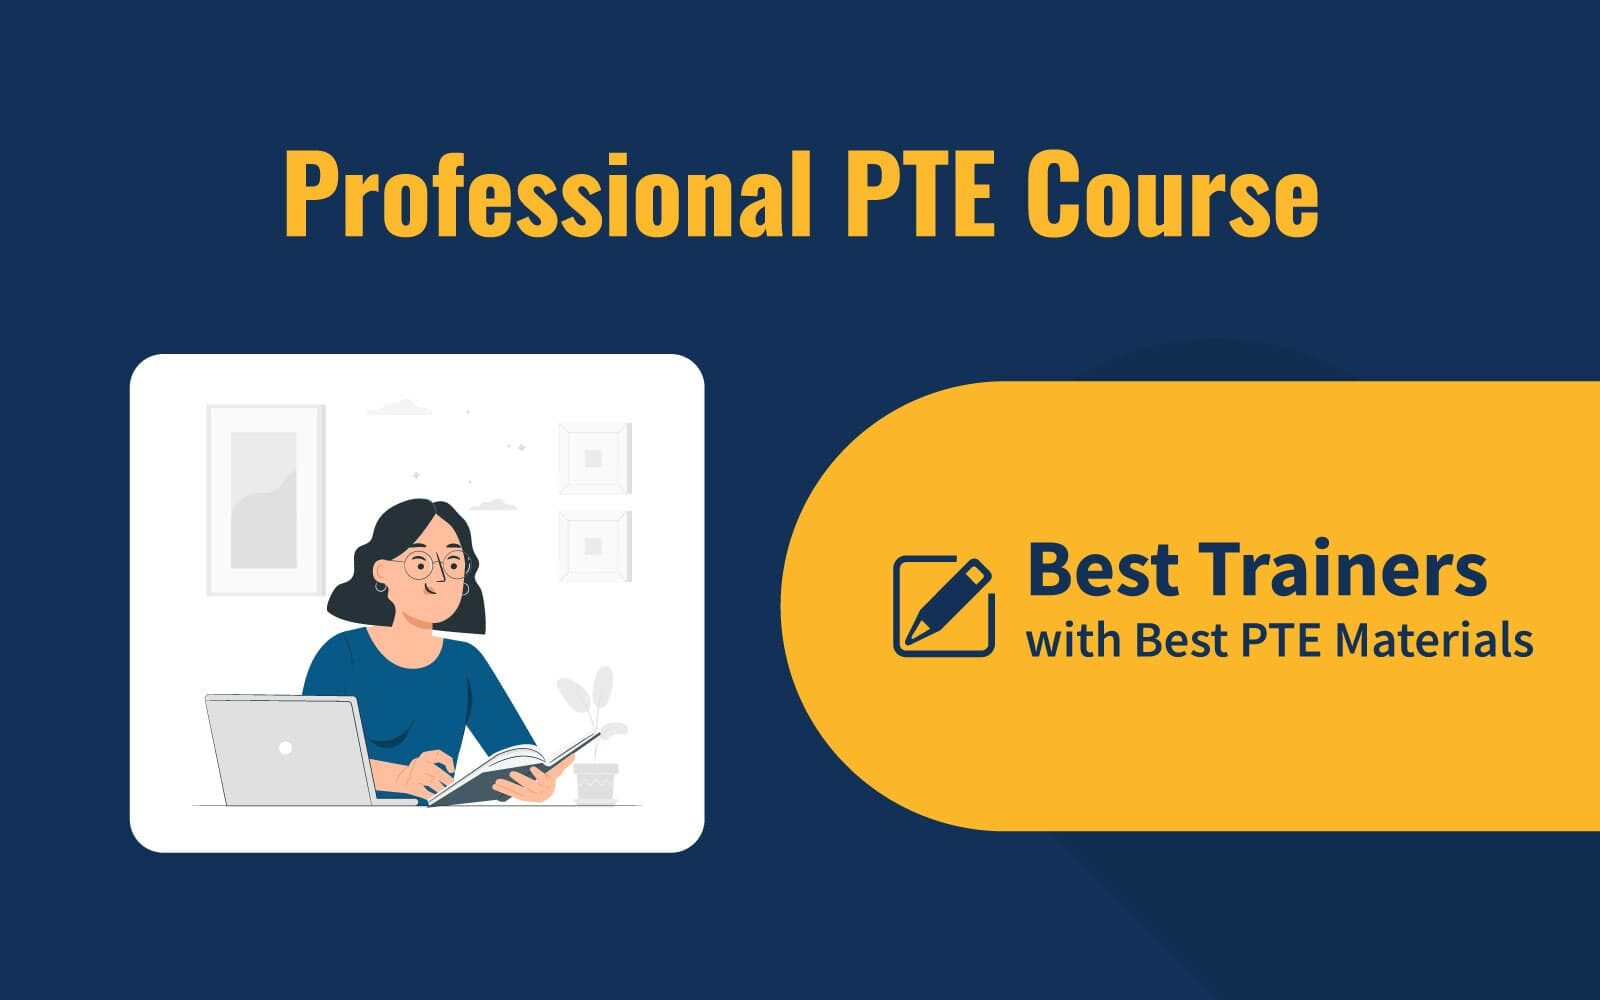 Professional PTE Course